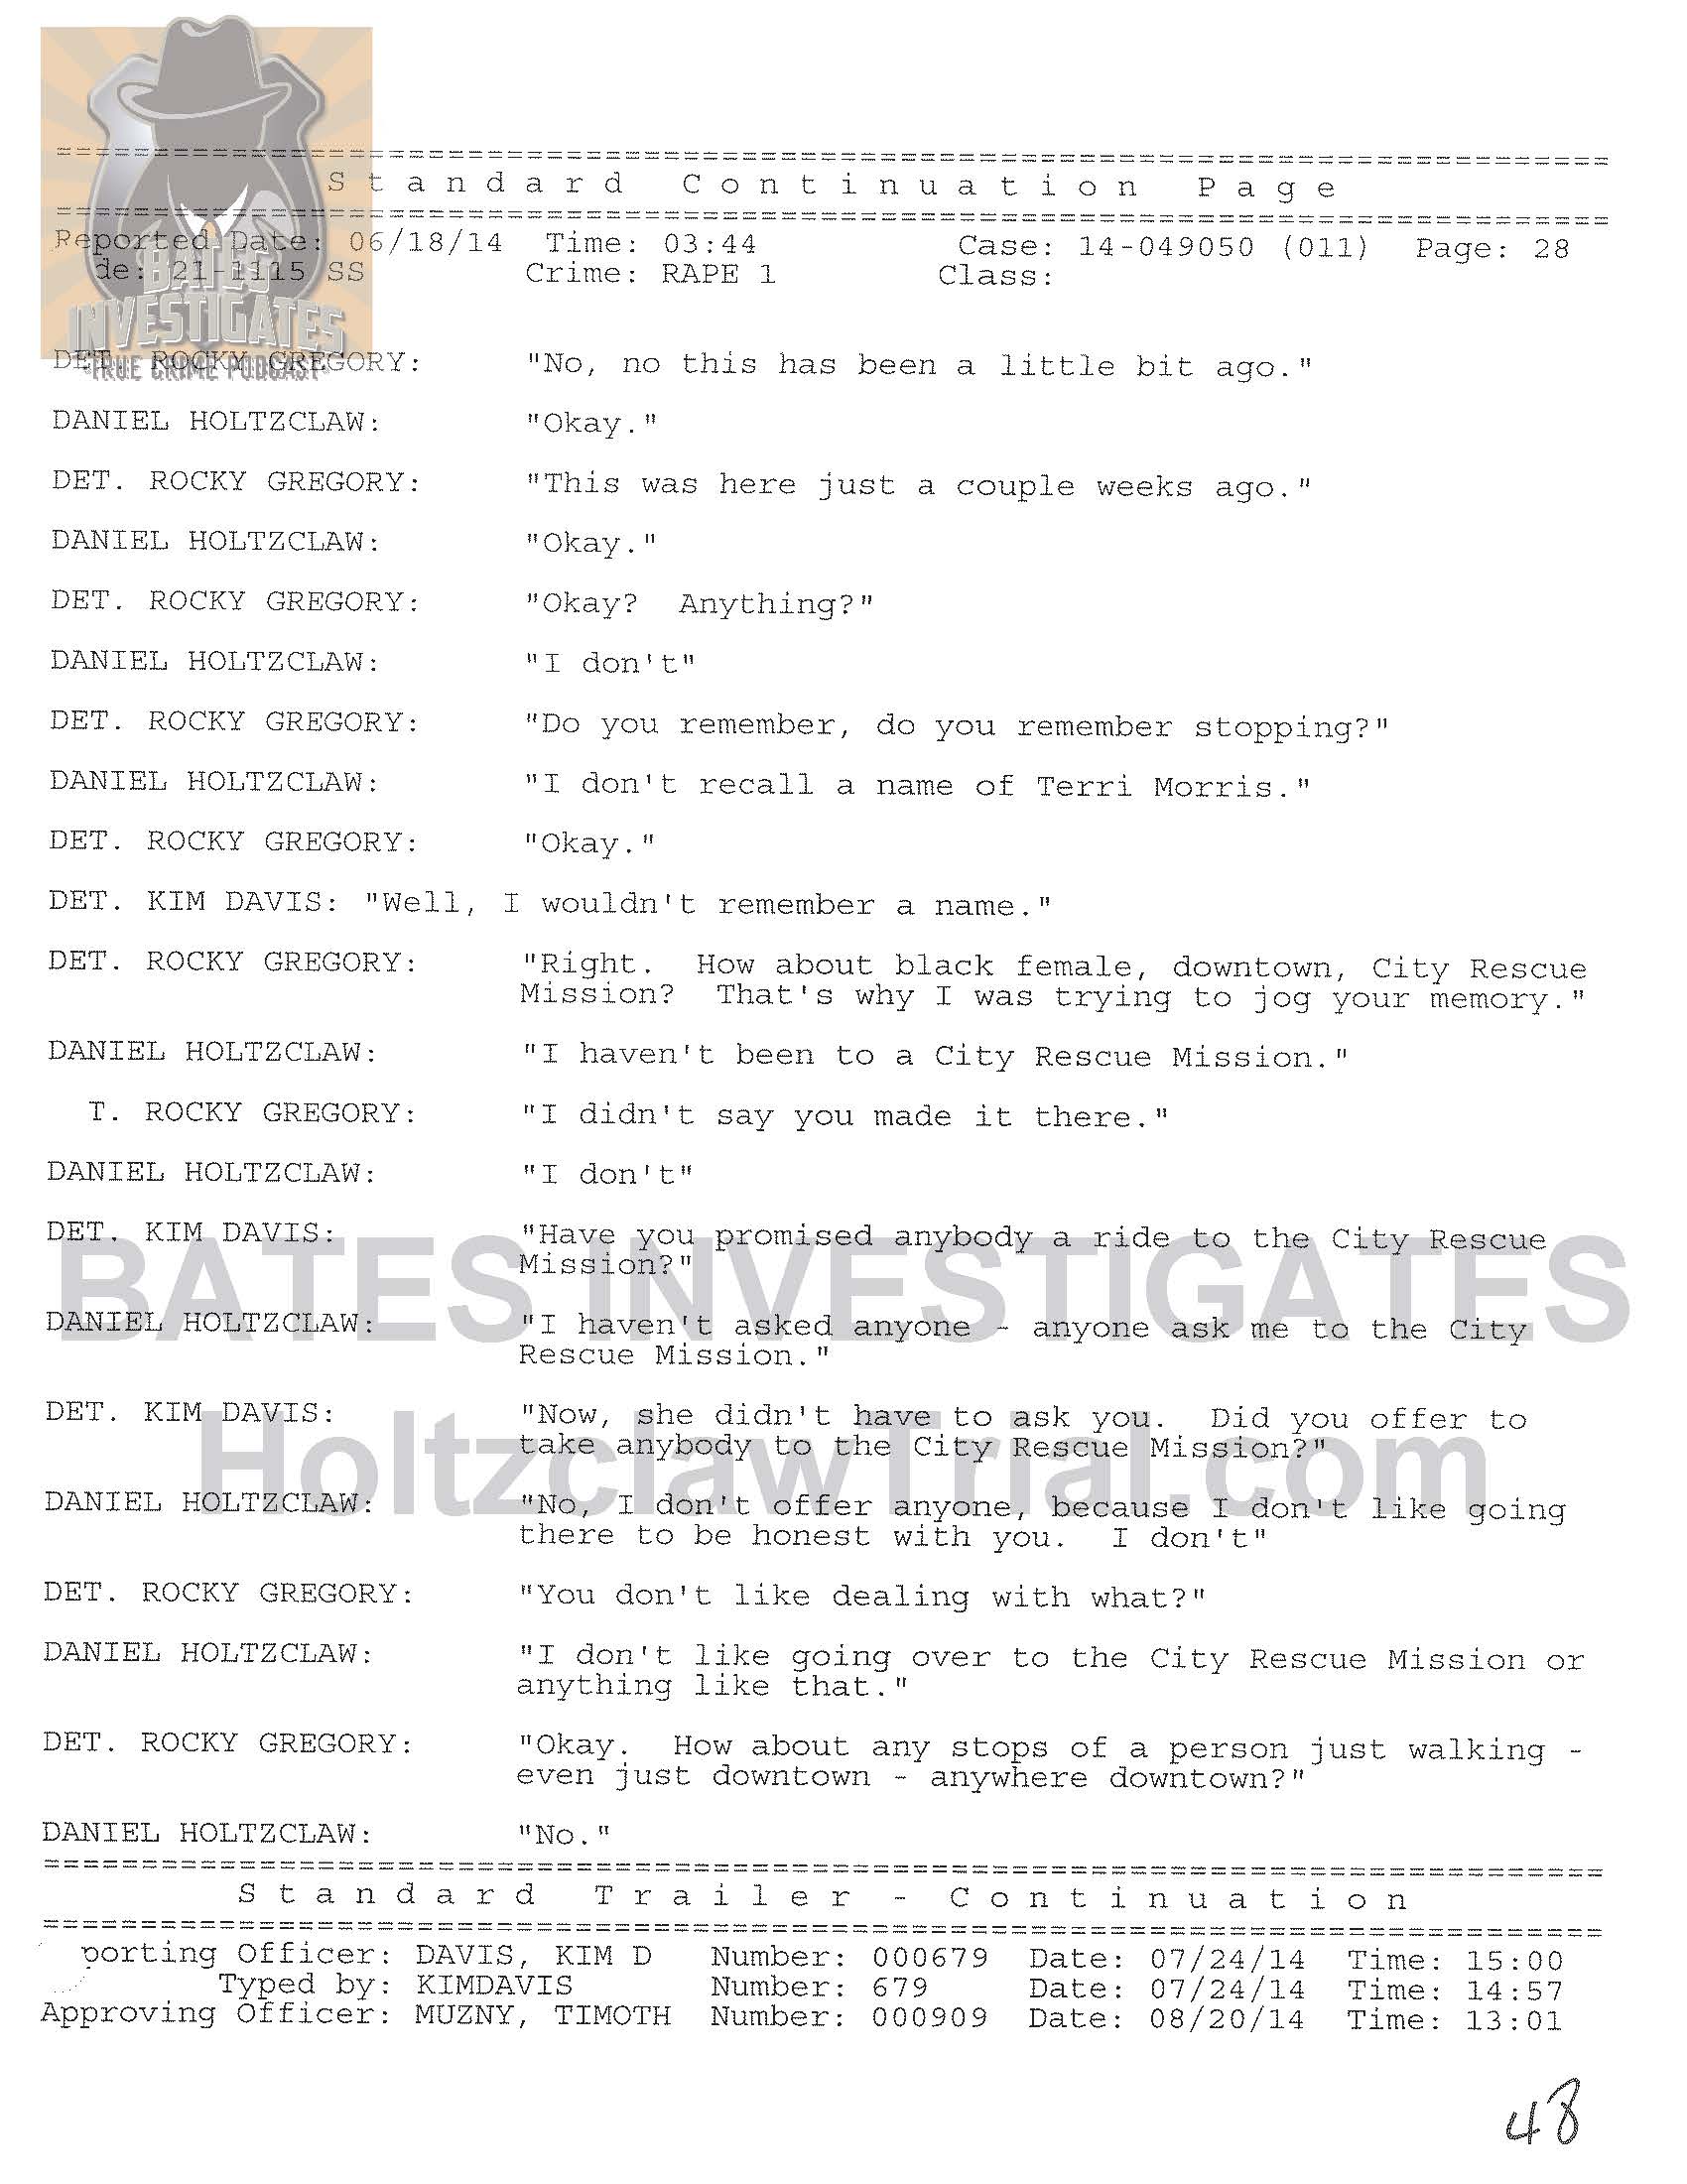 Holtzclaw Interrogation Transcript - Ep02 Redacted_Page_28.jpg